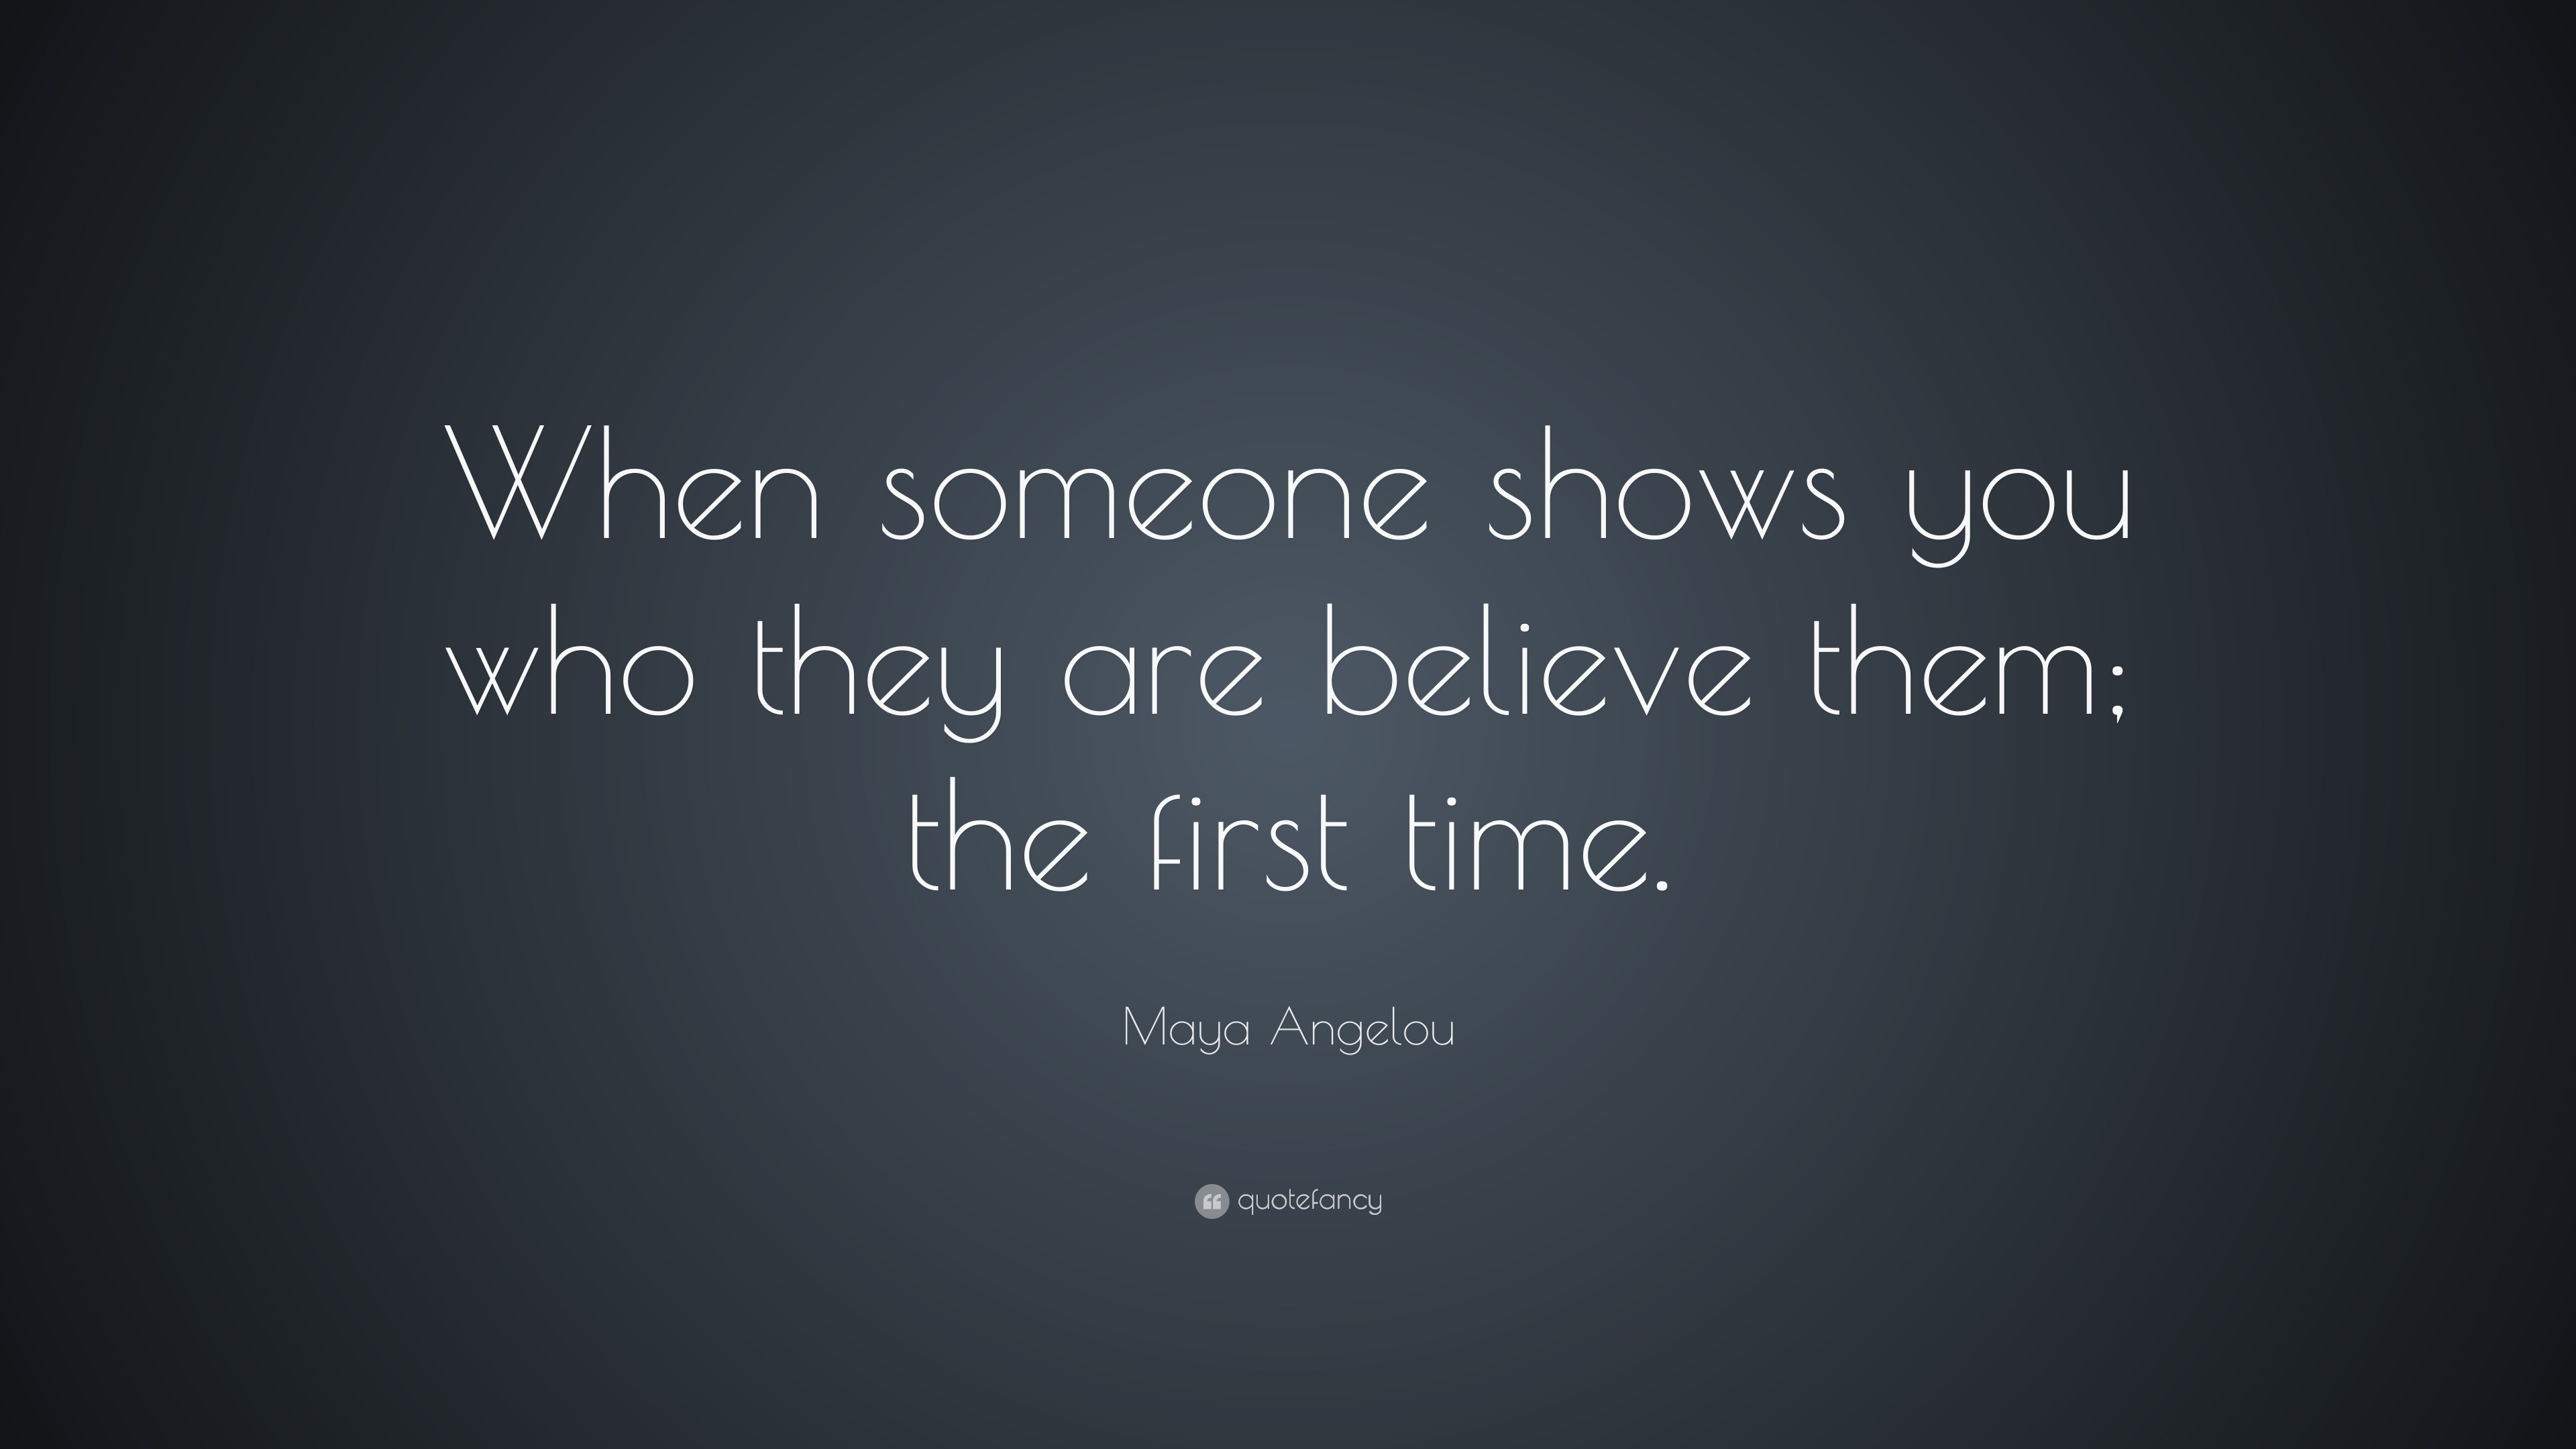 Maya Angelou Quote When Someone Shows You Who They Are Believe Them The First Time